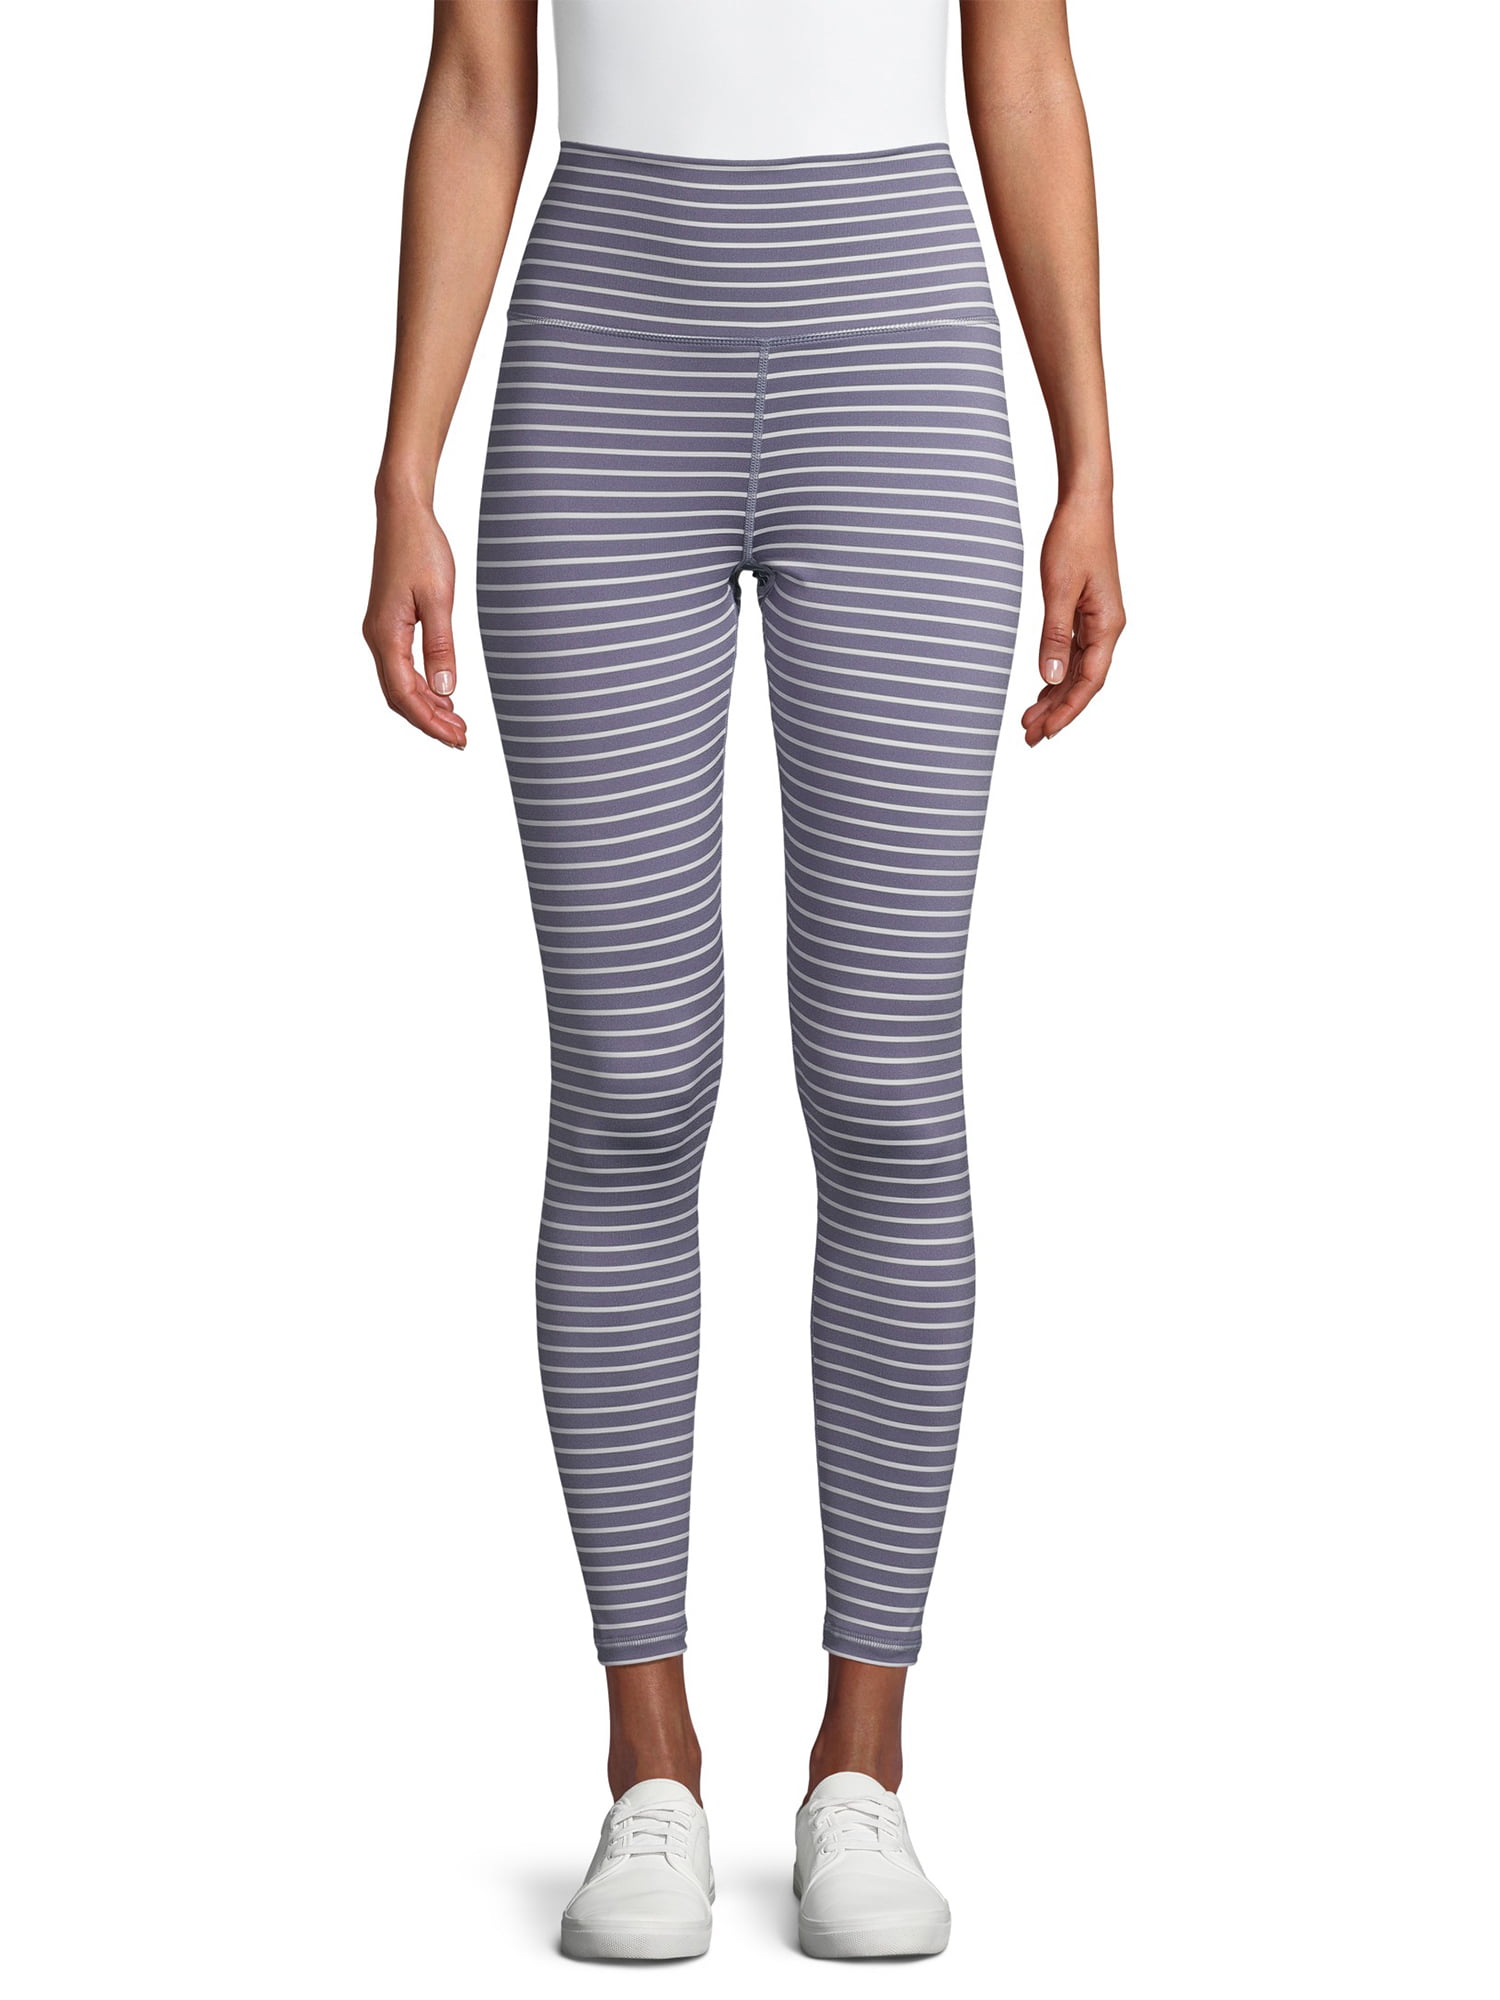 Find more Costco Danskin Leggings for sale at up to 90% off